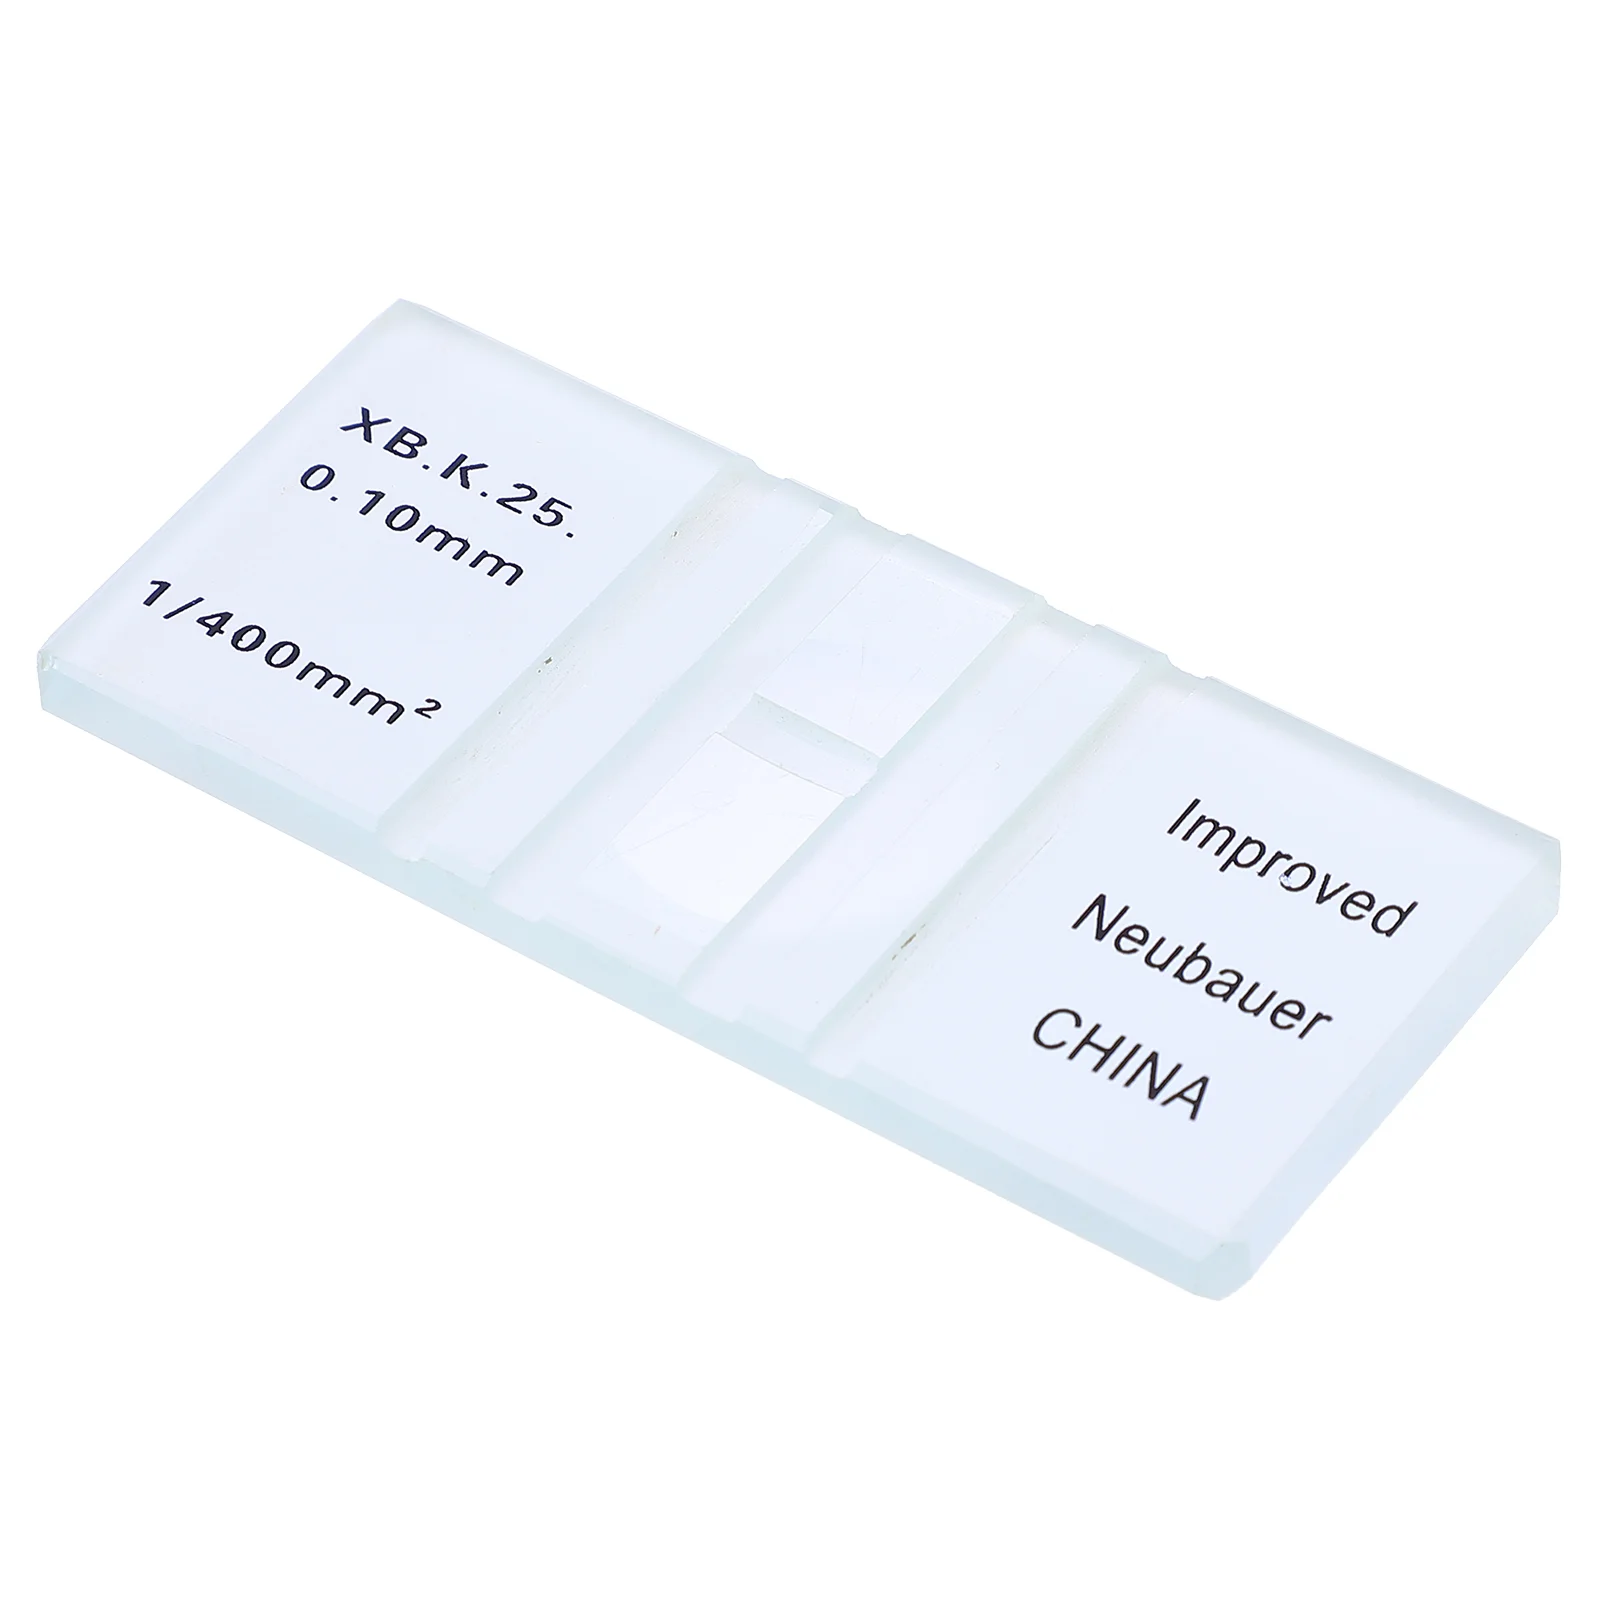 Counting Board Cell Chamber Blood Hemocytometer Tools Plastic Stool Laboratory Physcis Experiment Anemia Hemacytometer Rbc Yeast